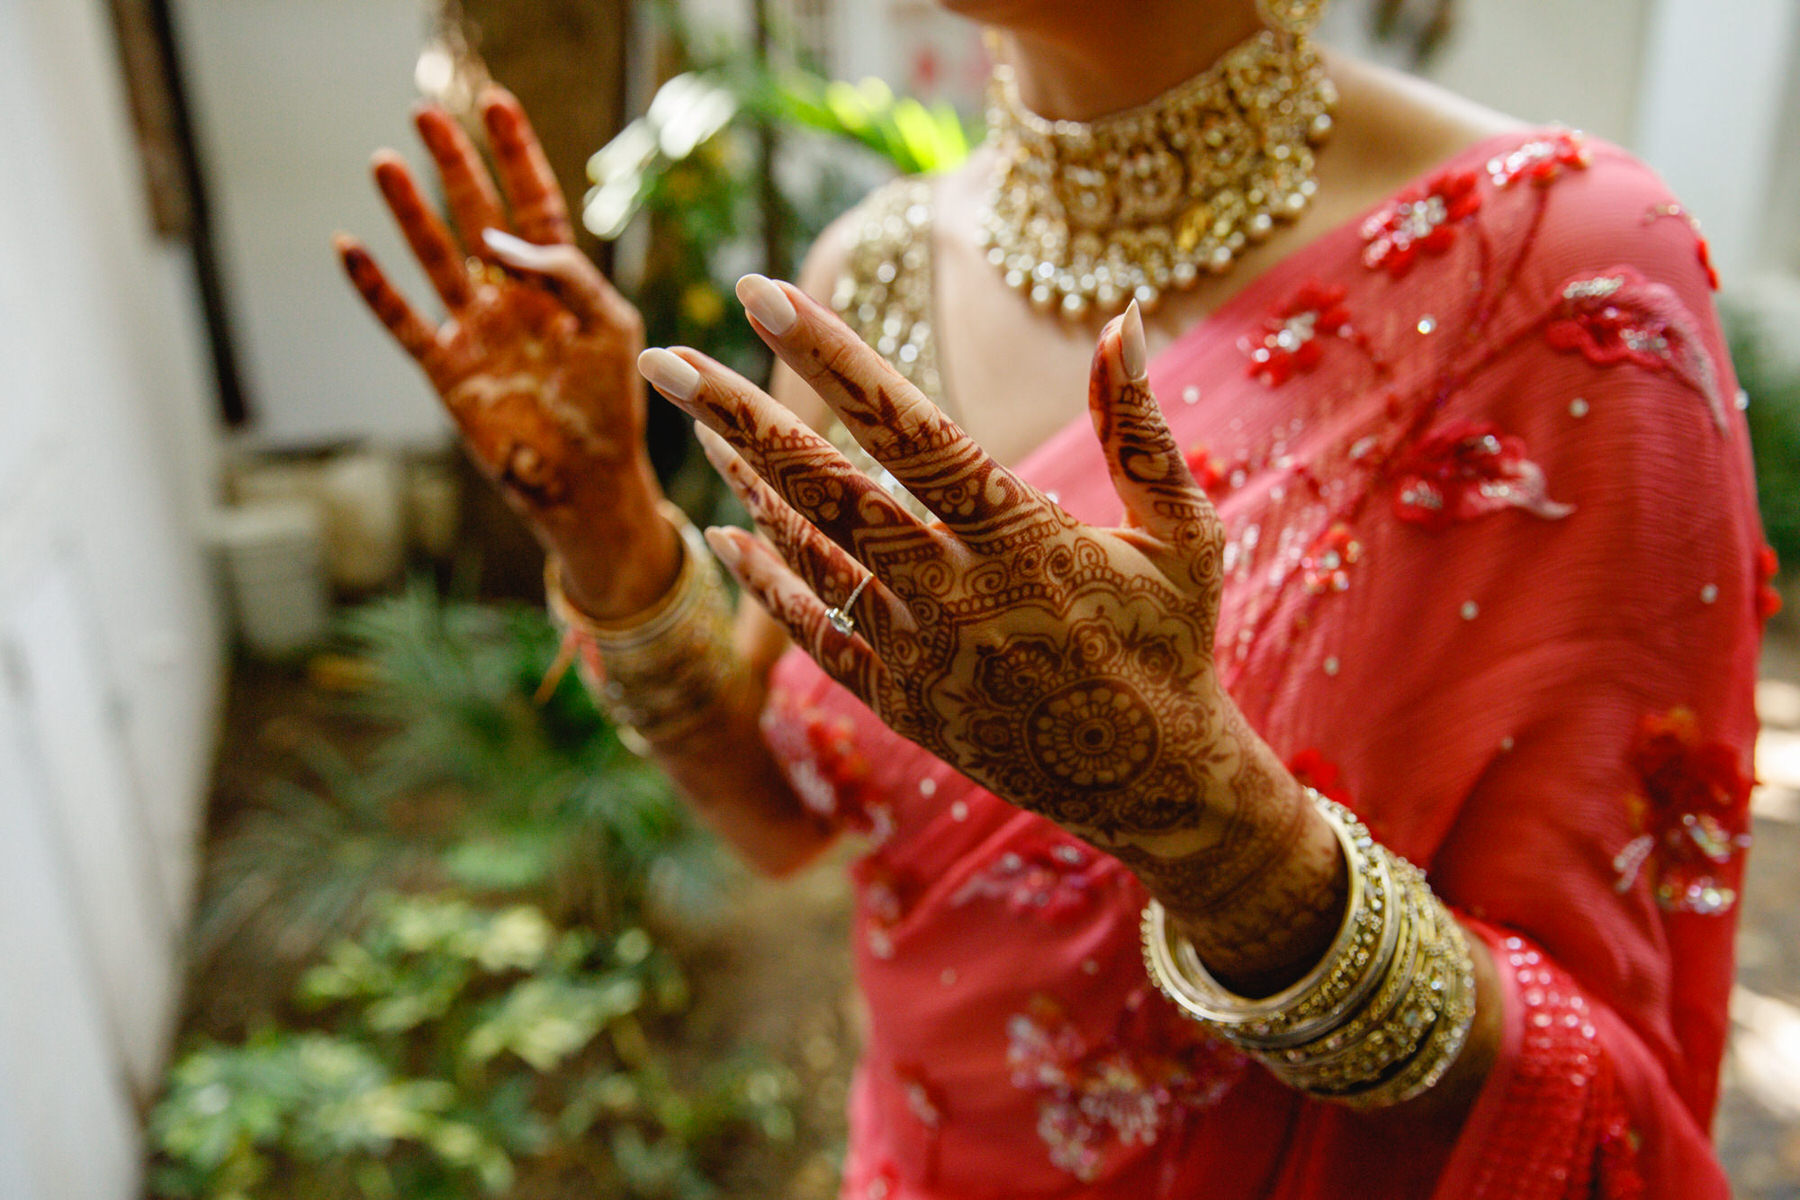 Elegant Indian bride in a bridal lehenga, complemented by intricate jewelry, during her wedding in Cartagena de Indias.